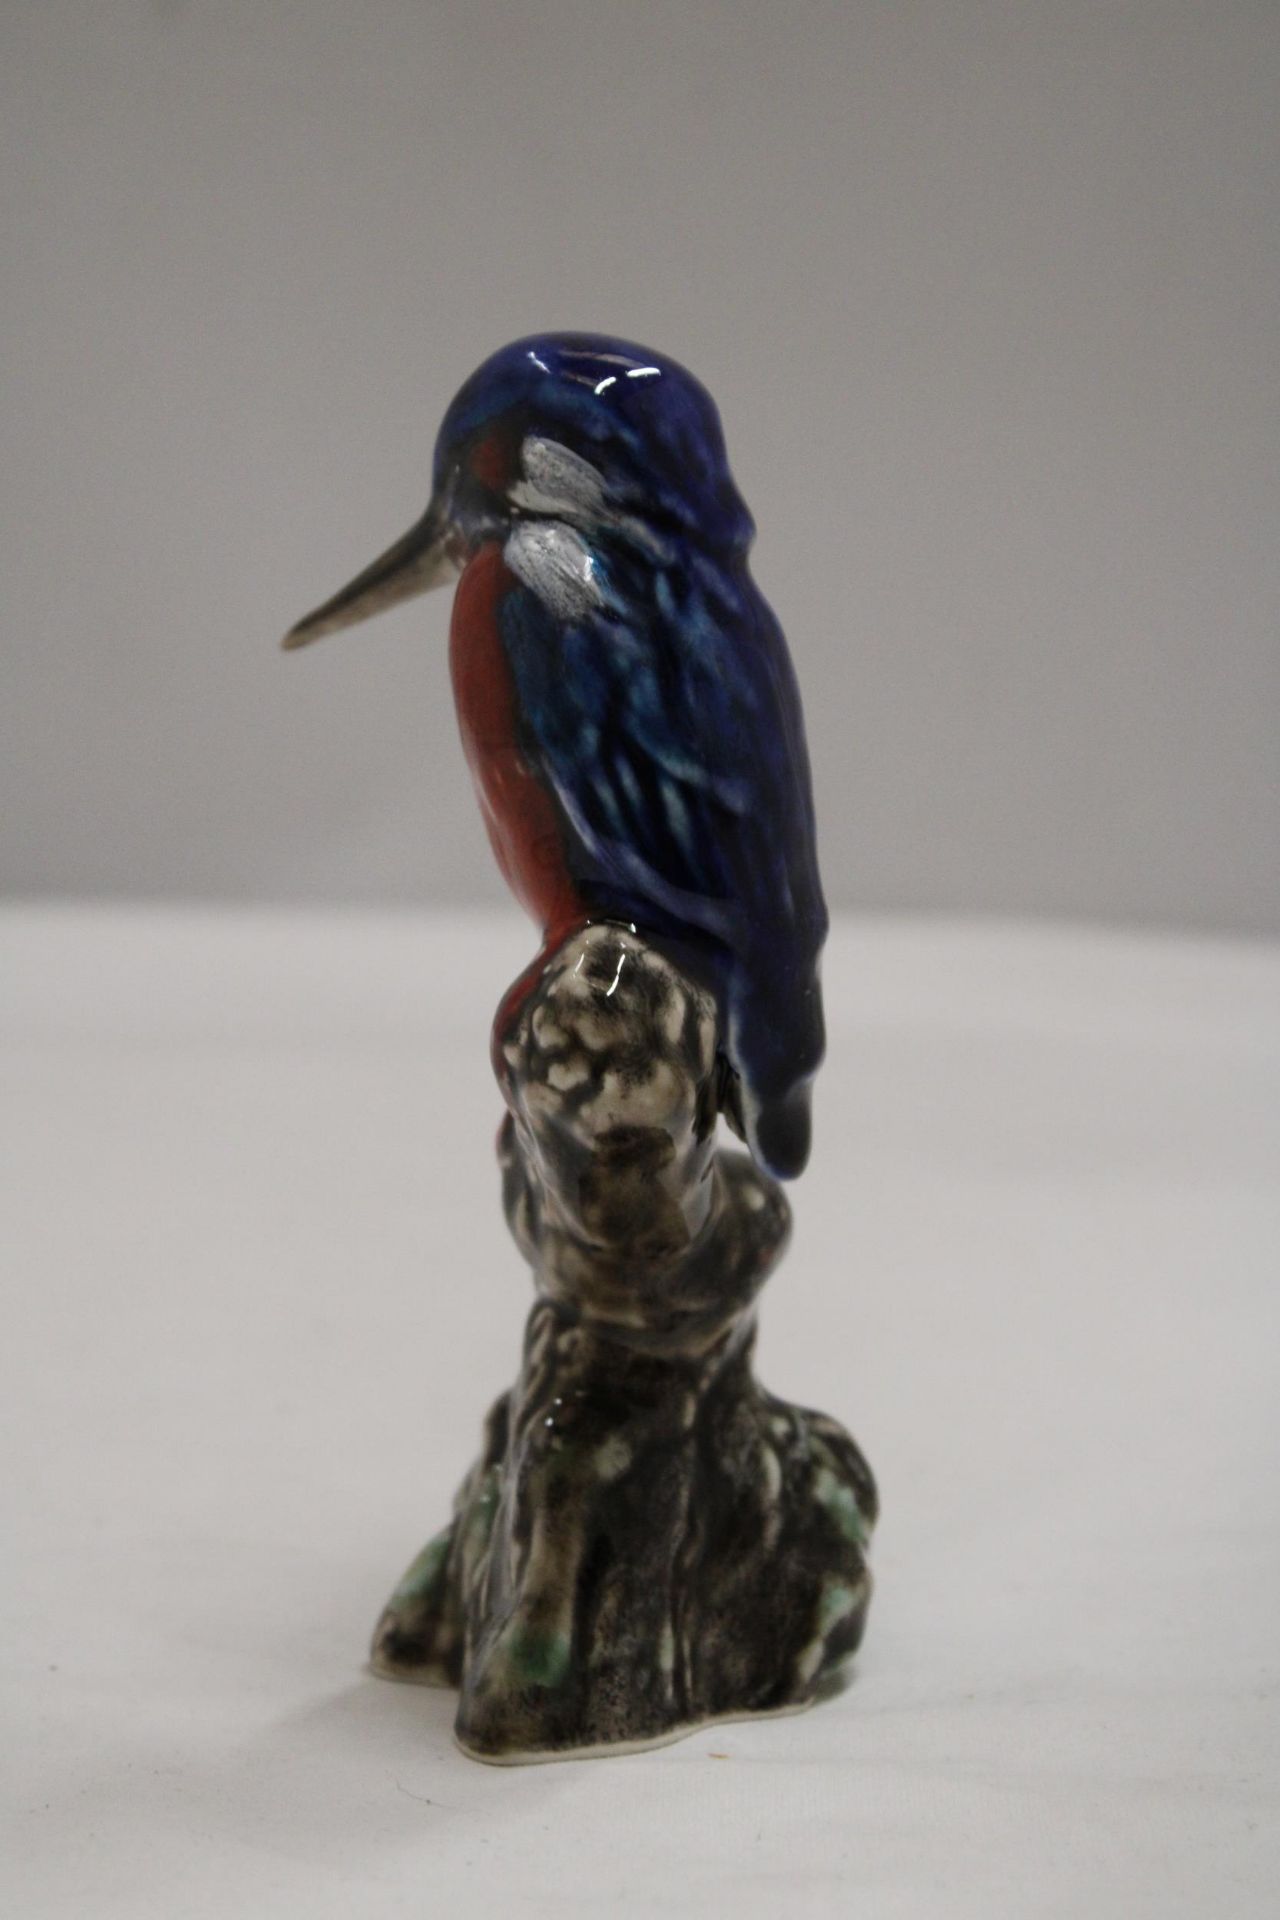 AN ANITA HARRIS KINGFISHER SIGNED IN GOLD - Image 3 of 6